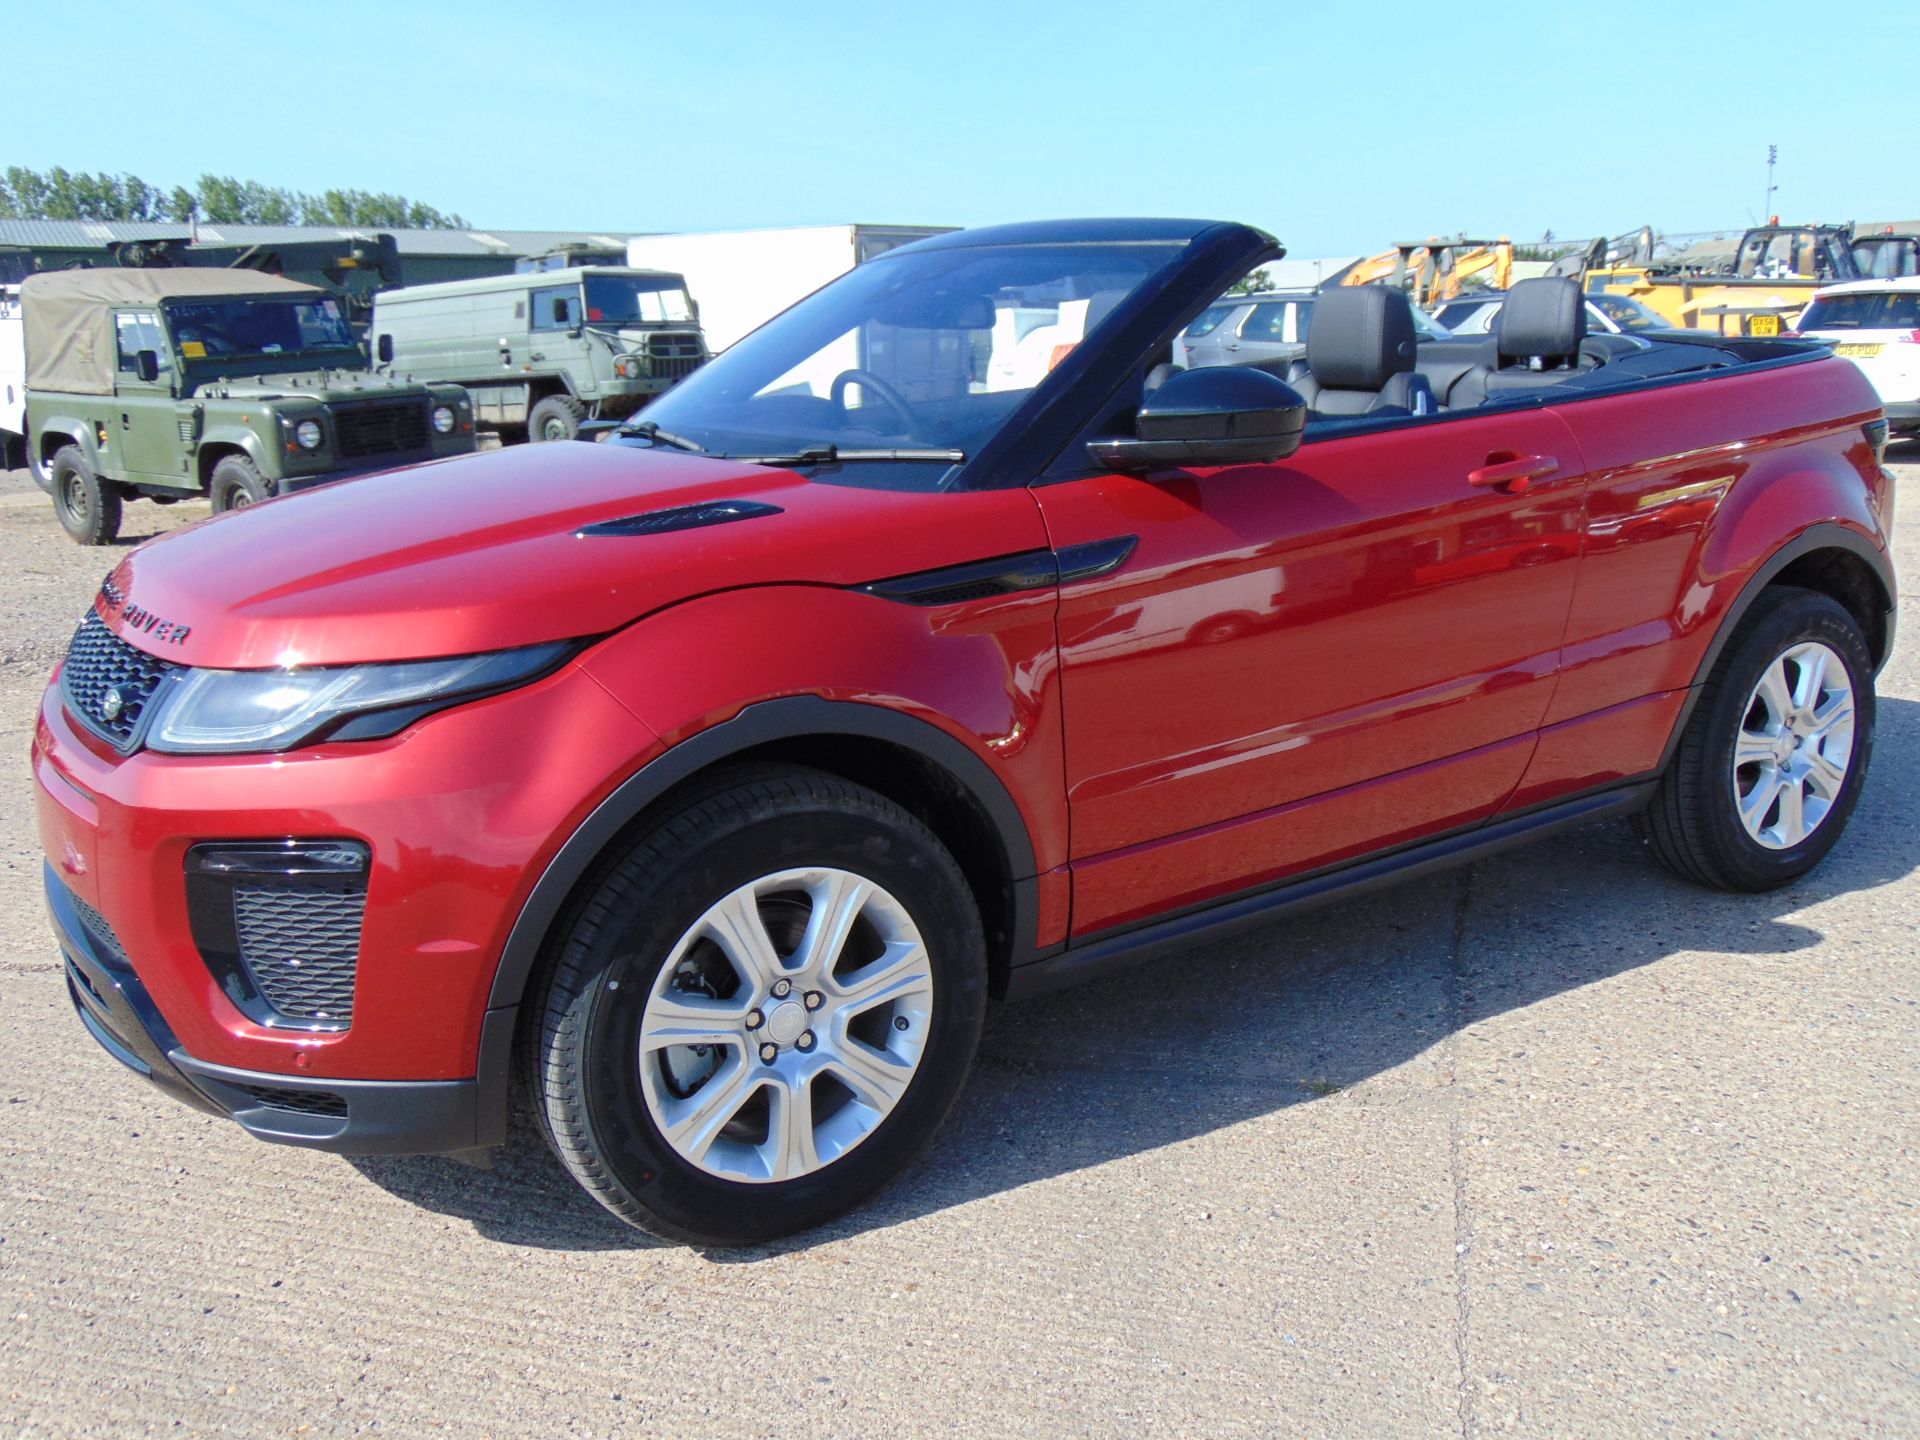 NEW UNUSED Range Rover Evoque 2.0 i4 HSE Dynamic Convertible - Image 2 of 39